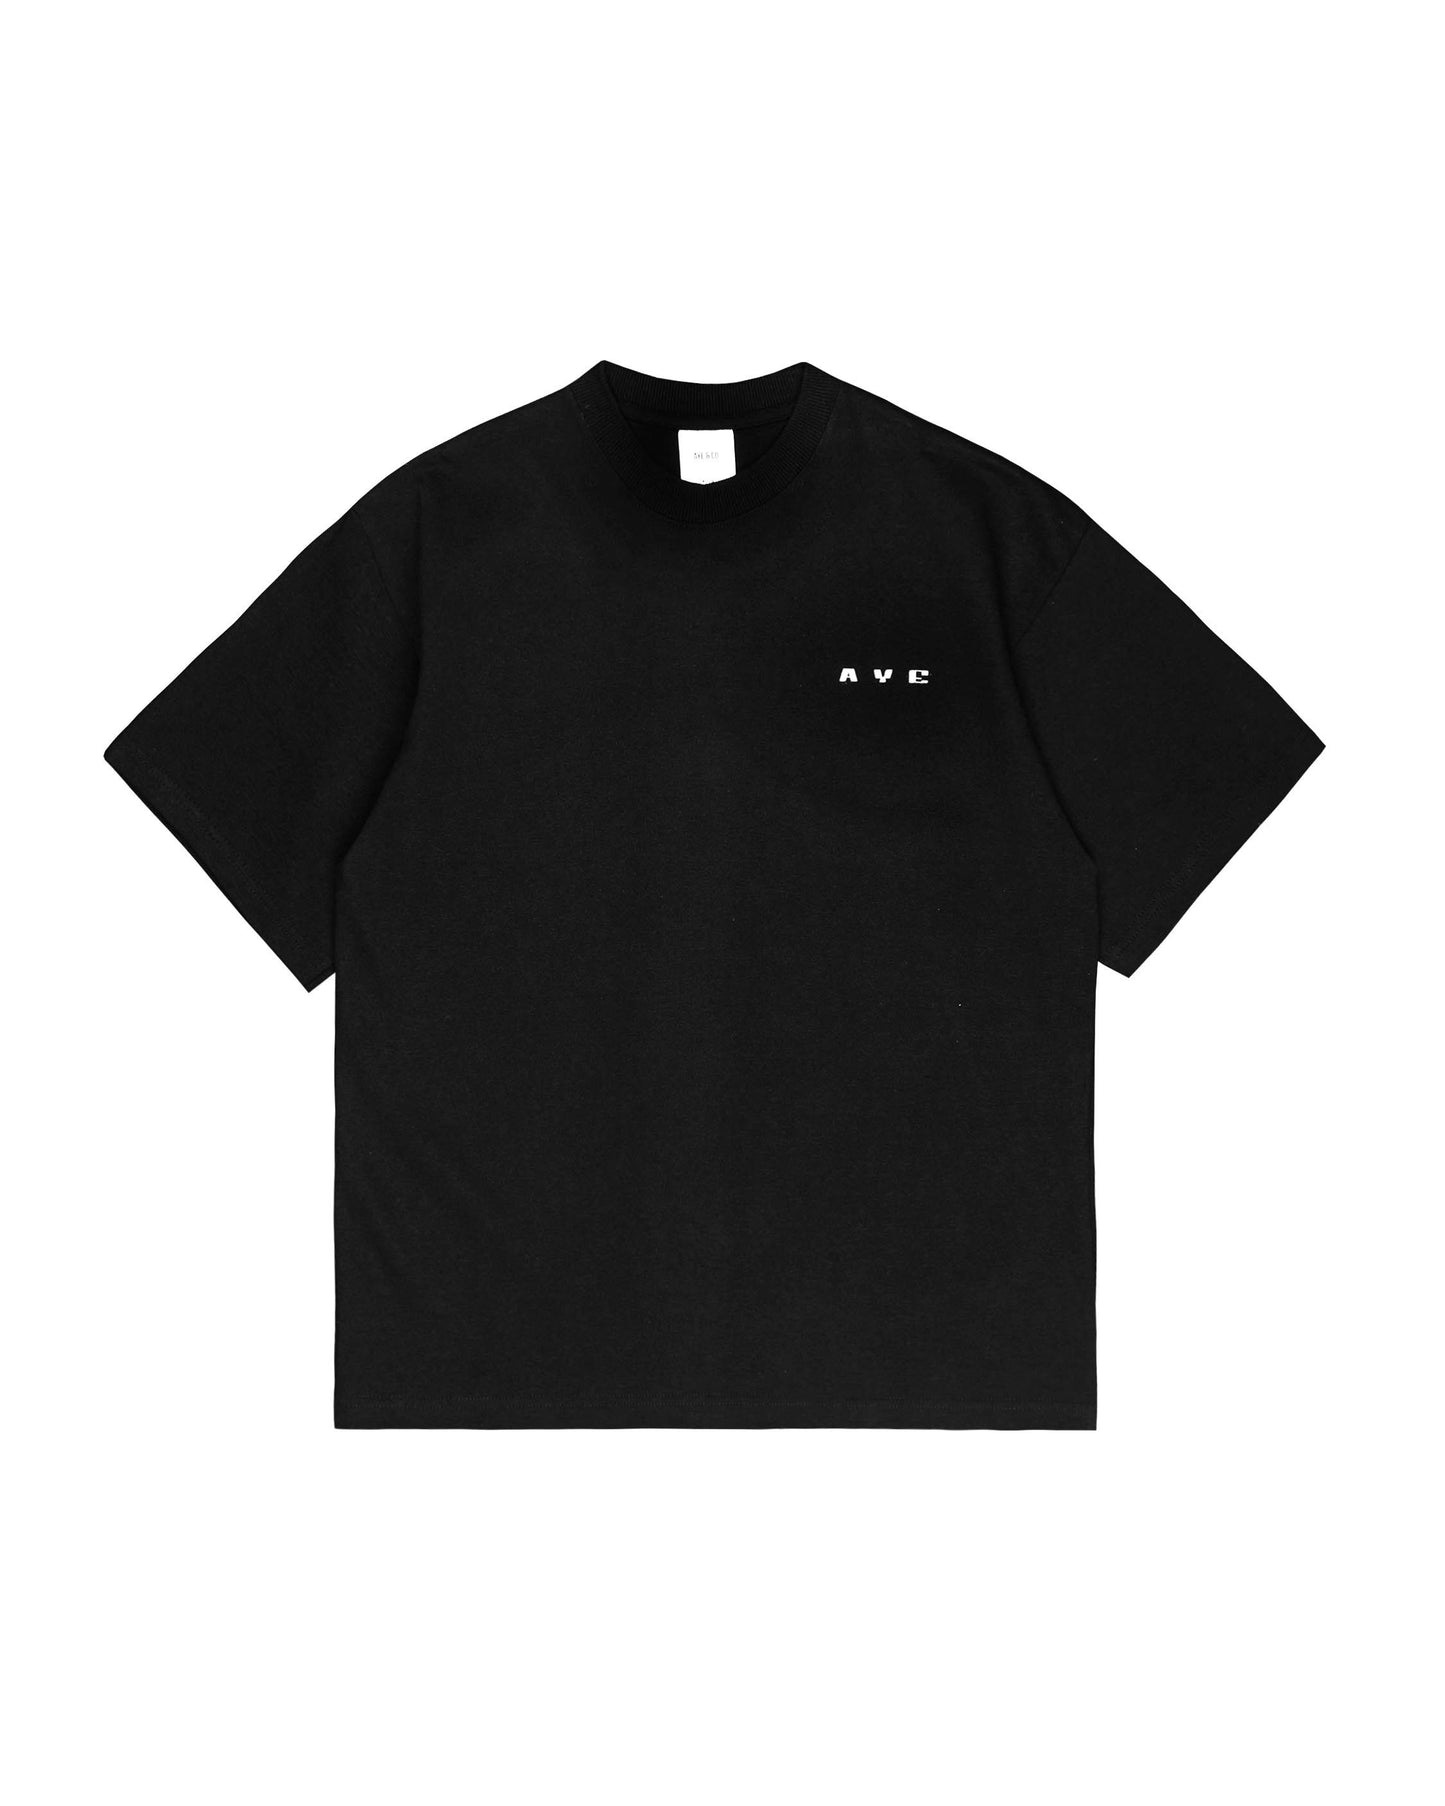 Sator Black Relaxed Fit Tees